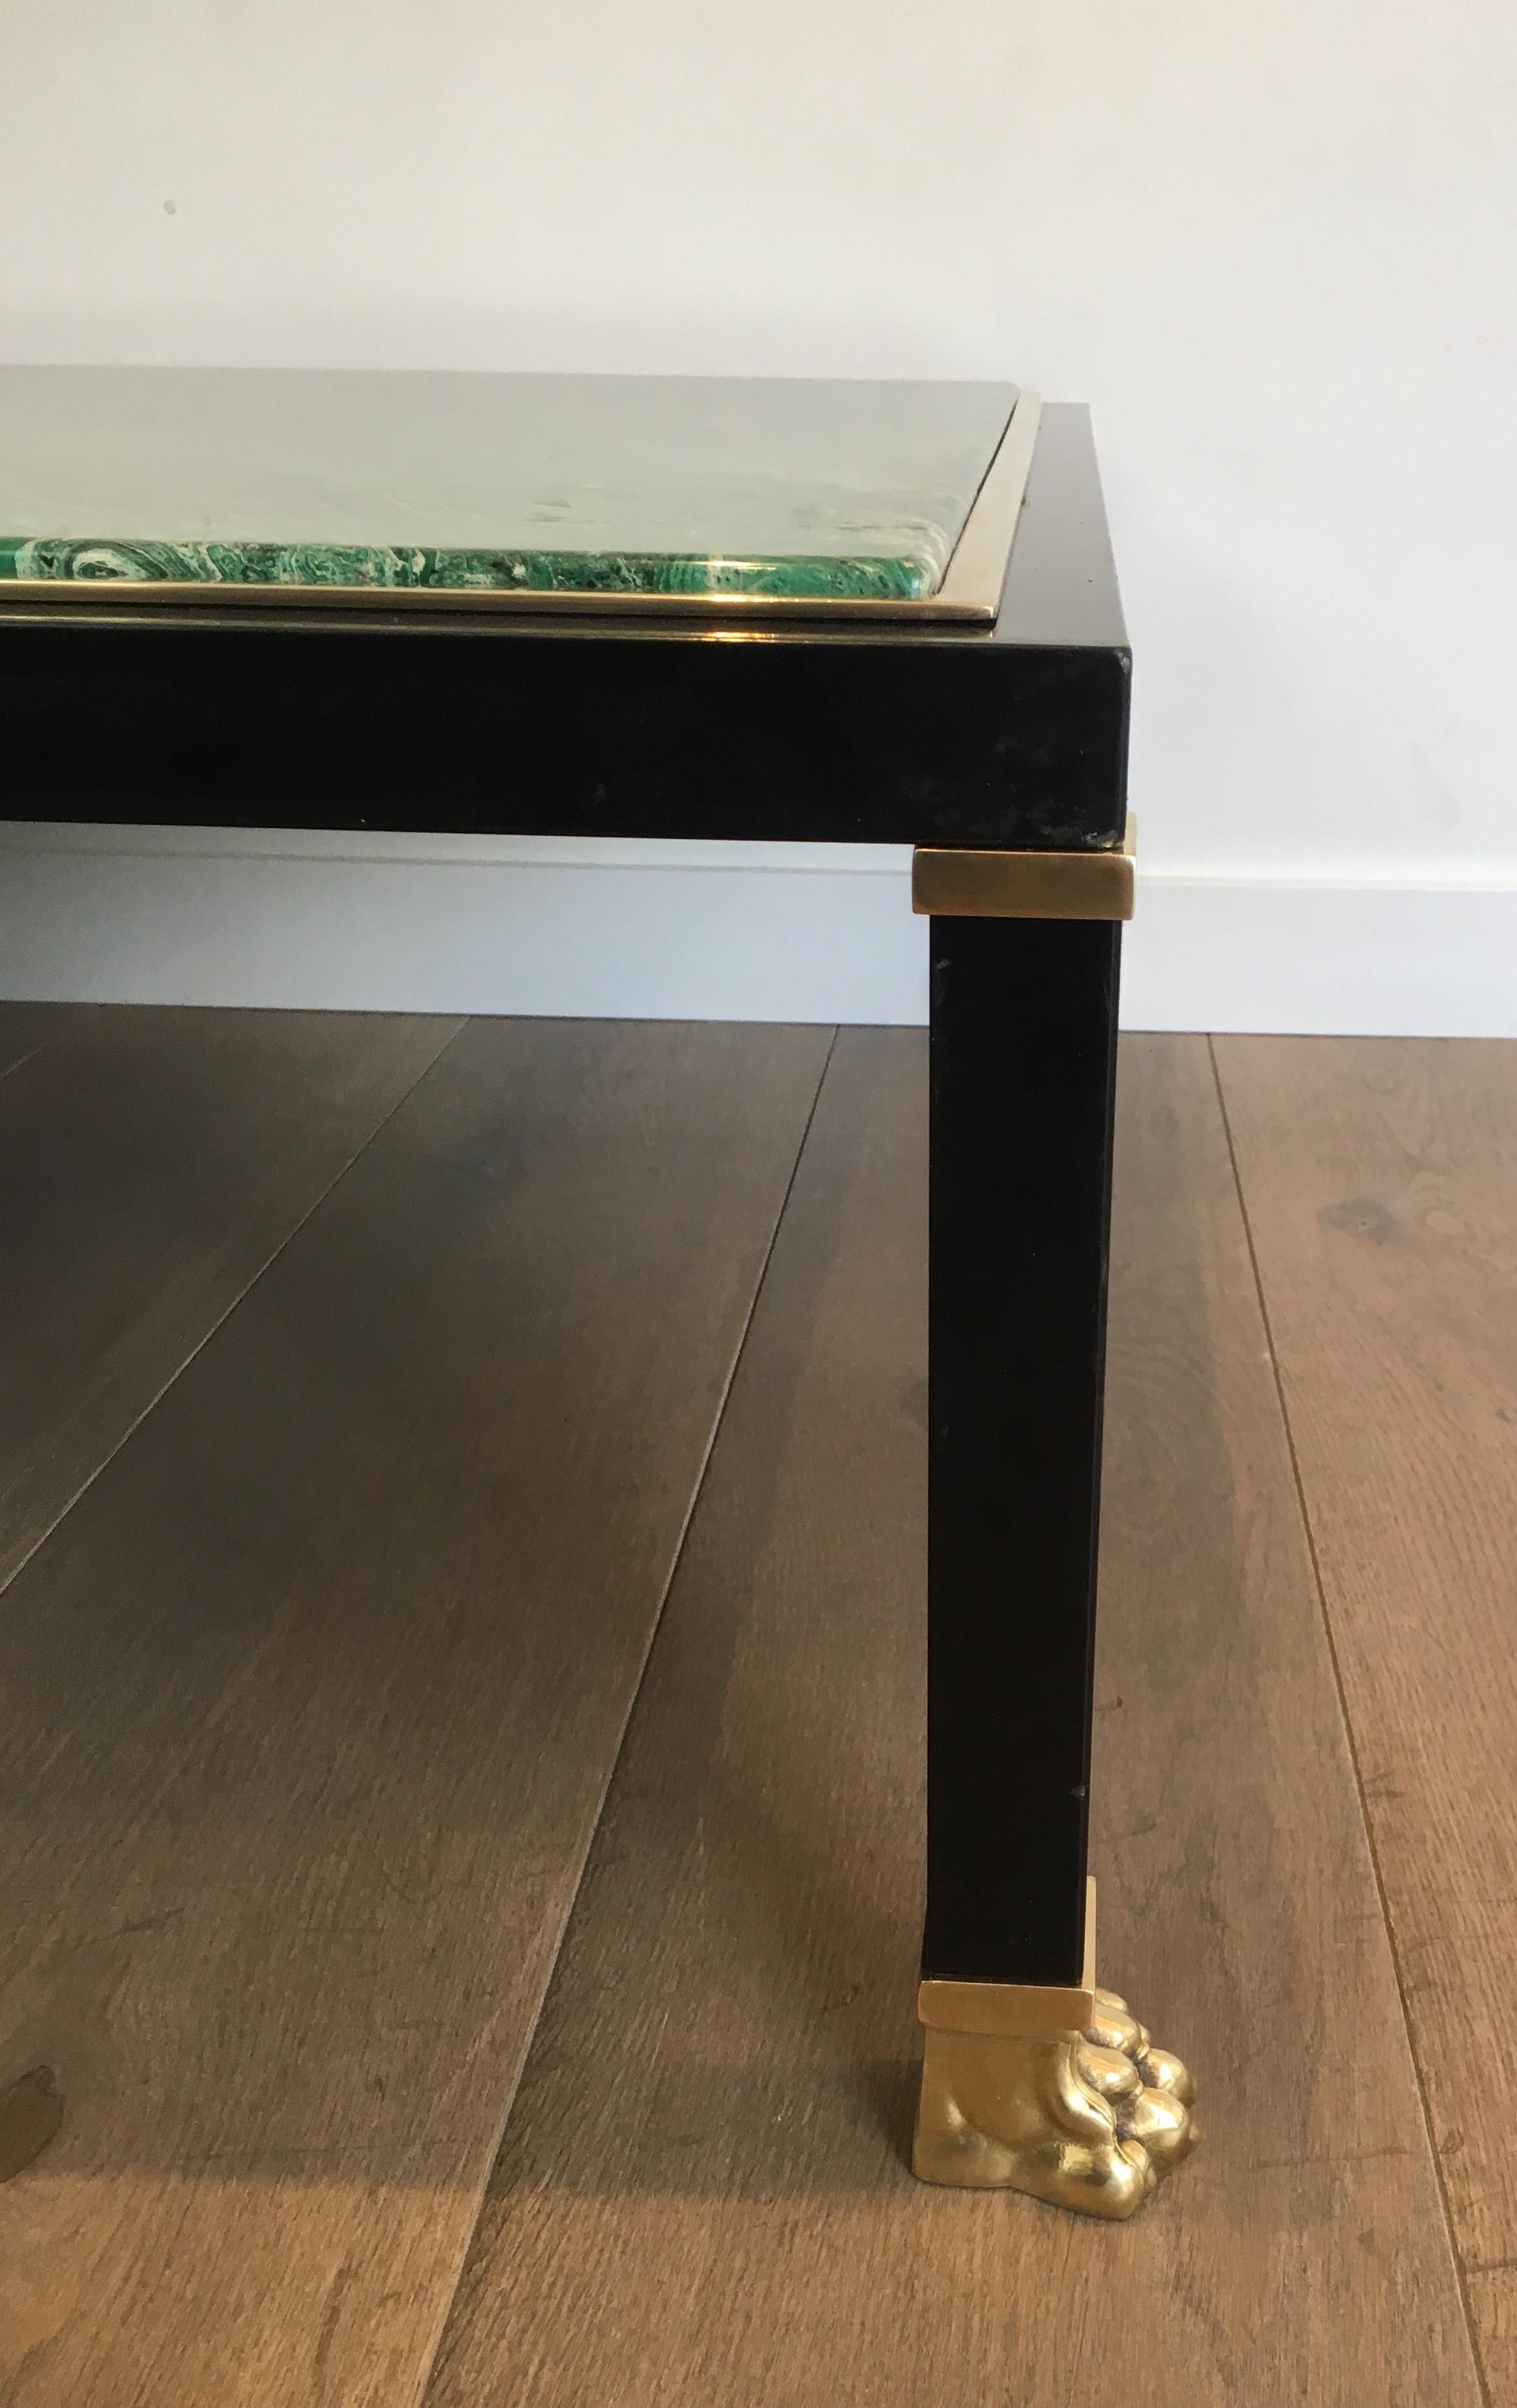 Malachite Style, Black Lacquered Metal & Claw Feet Coffee Table by Guy Lefèvre 1